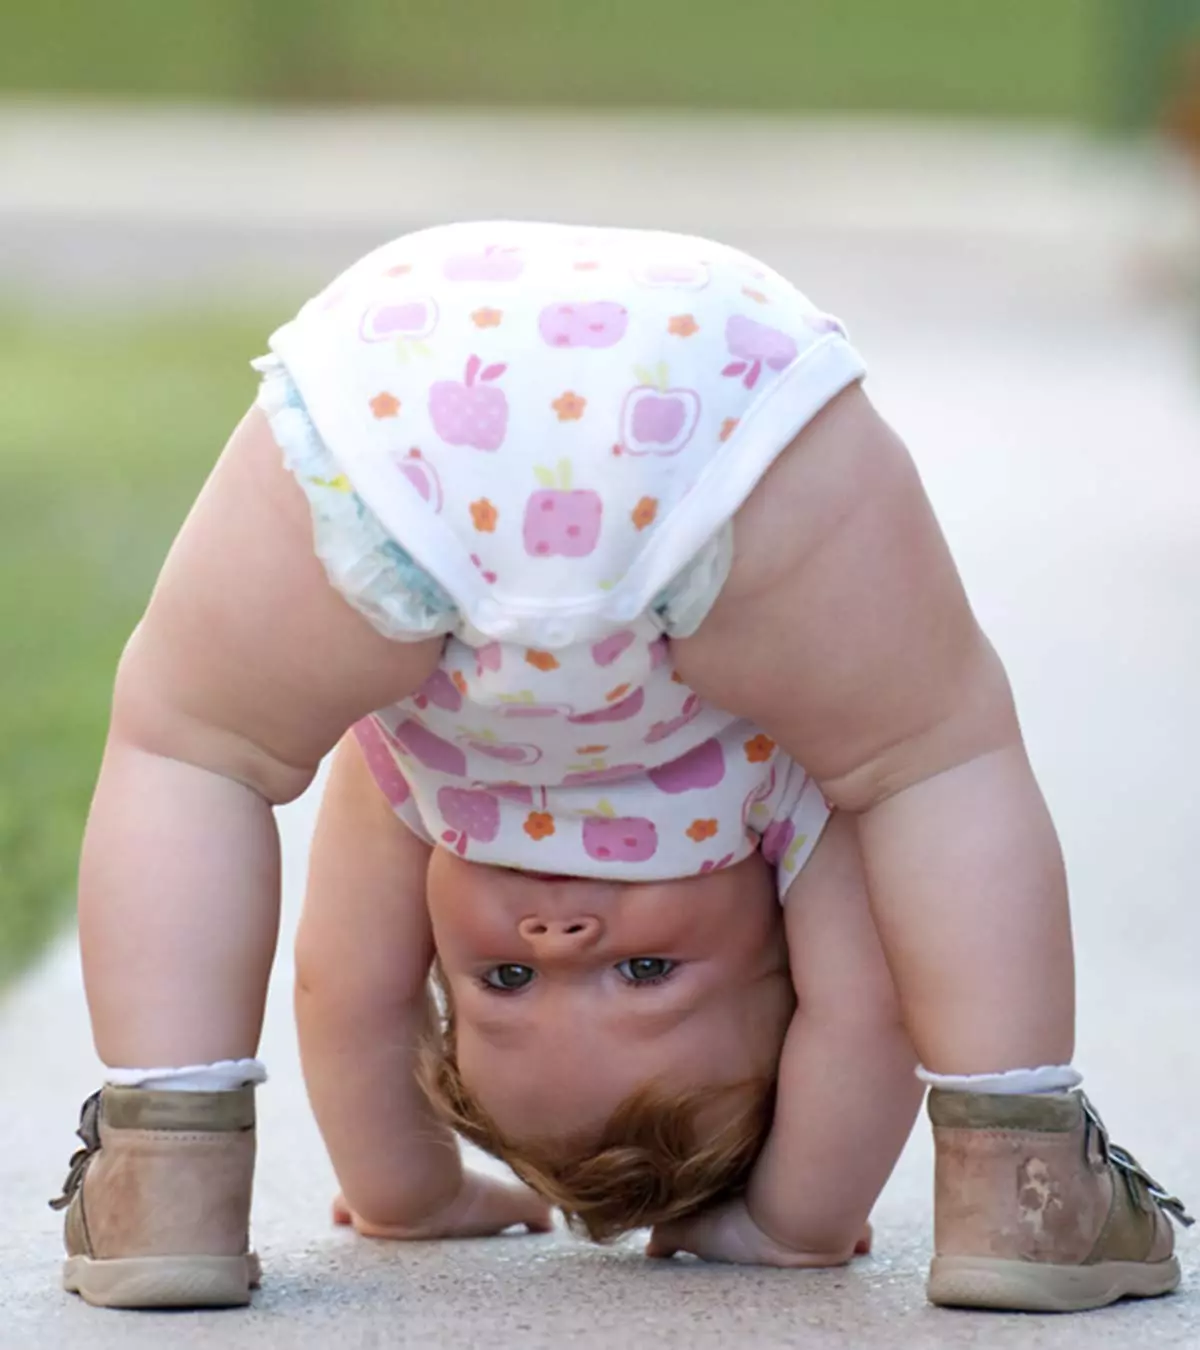 9 Things Your Toddler Can Do That You Definitely Can’t